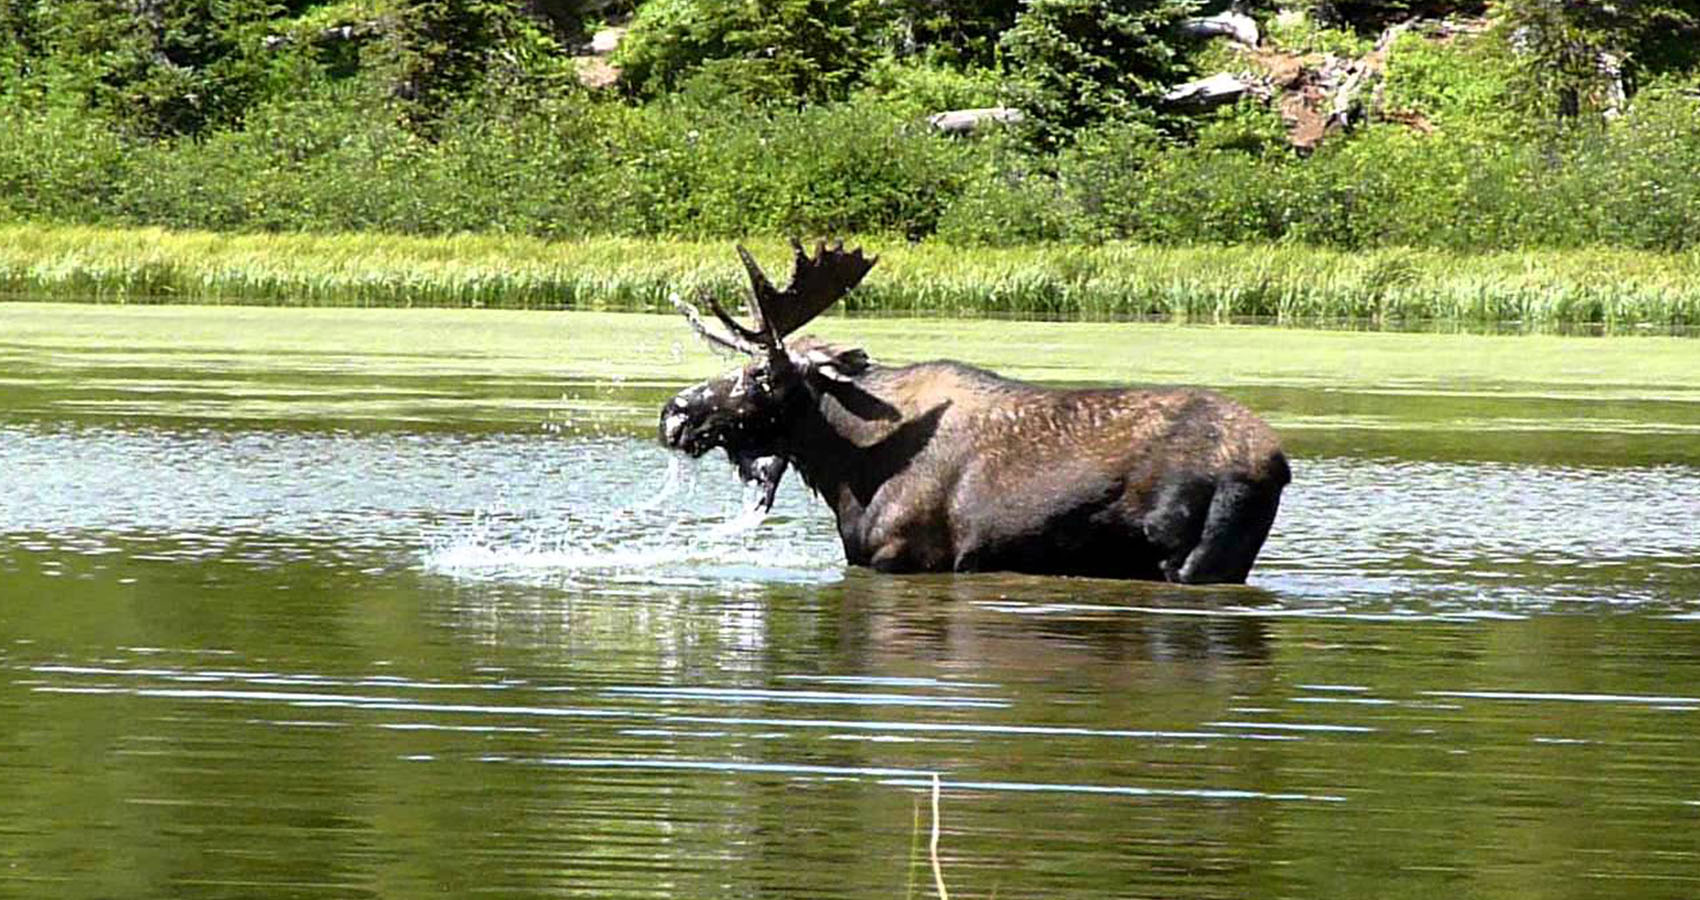 hard to believe facts - A moose can dive underwater down to nearly twenty feet in search of food